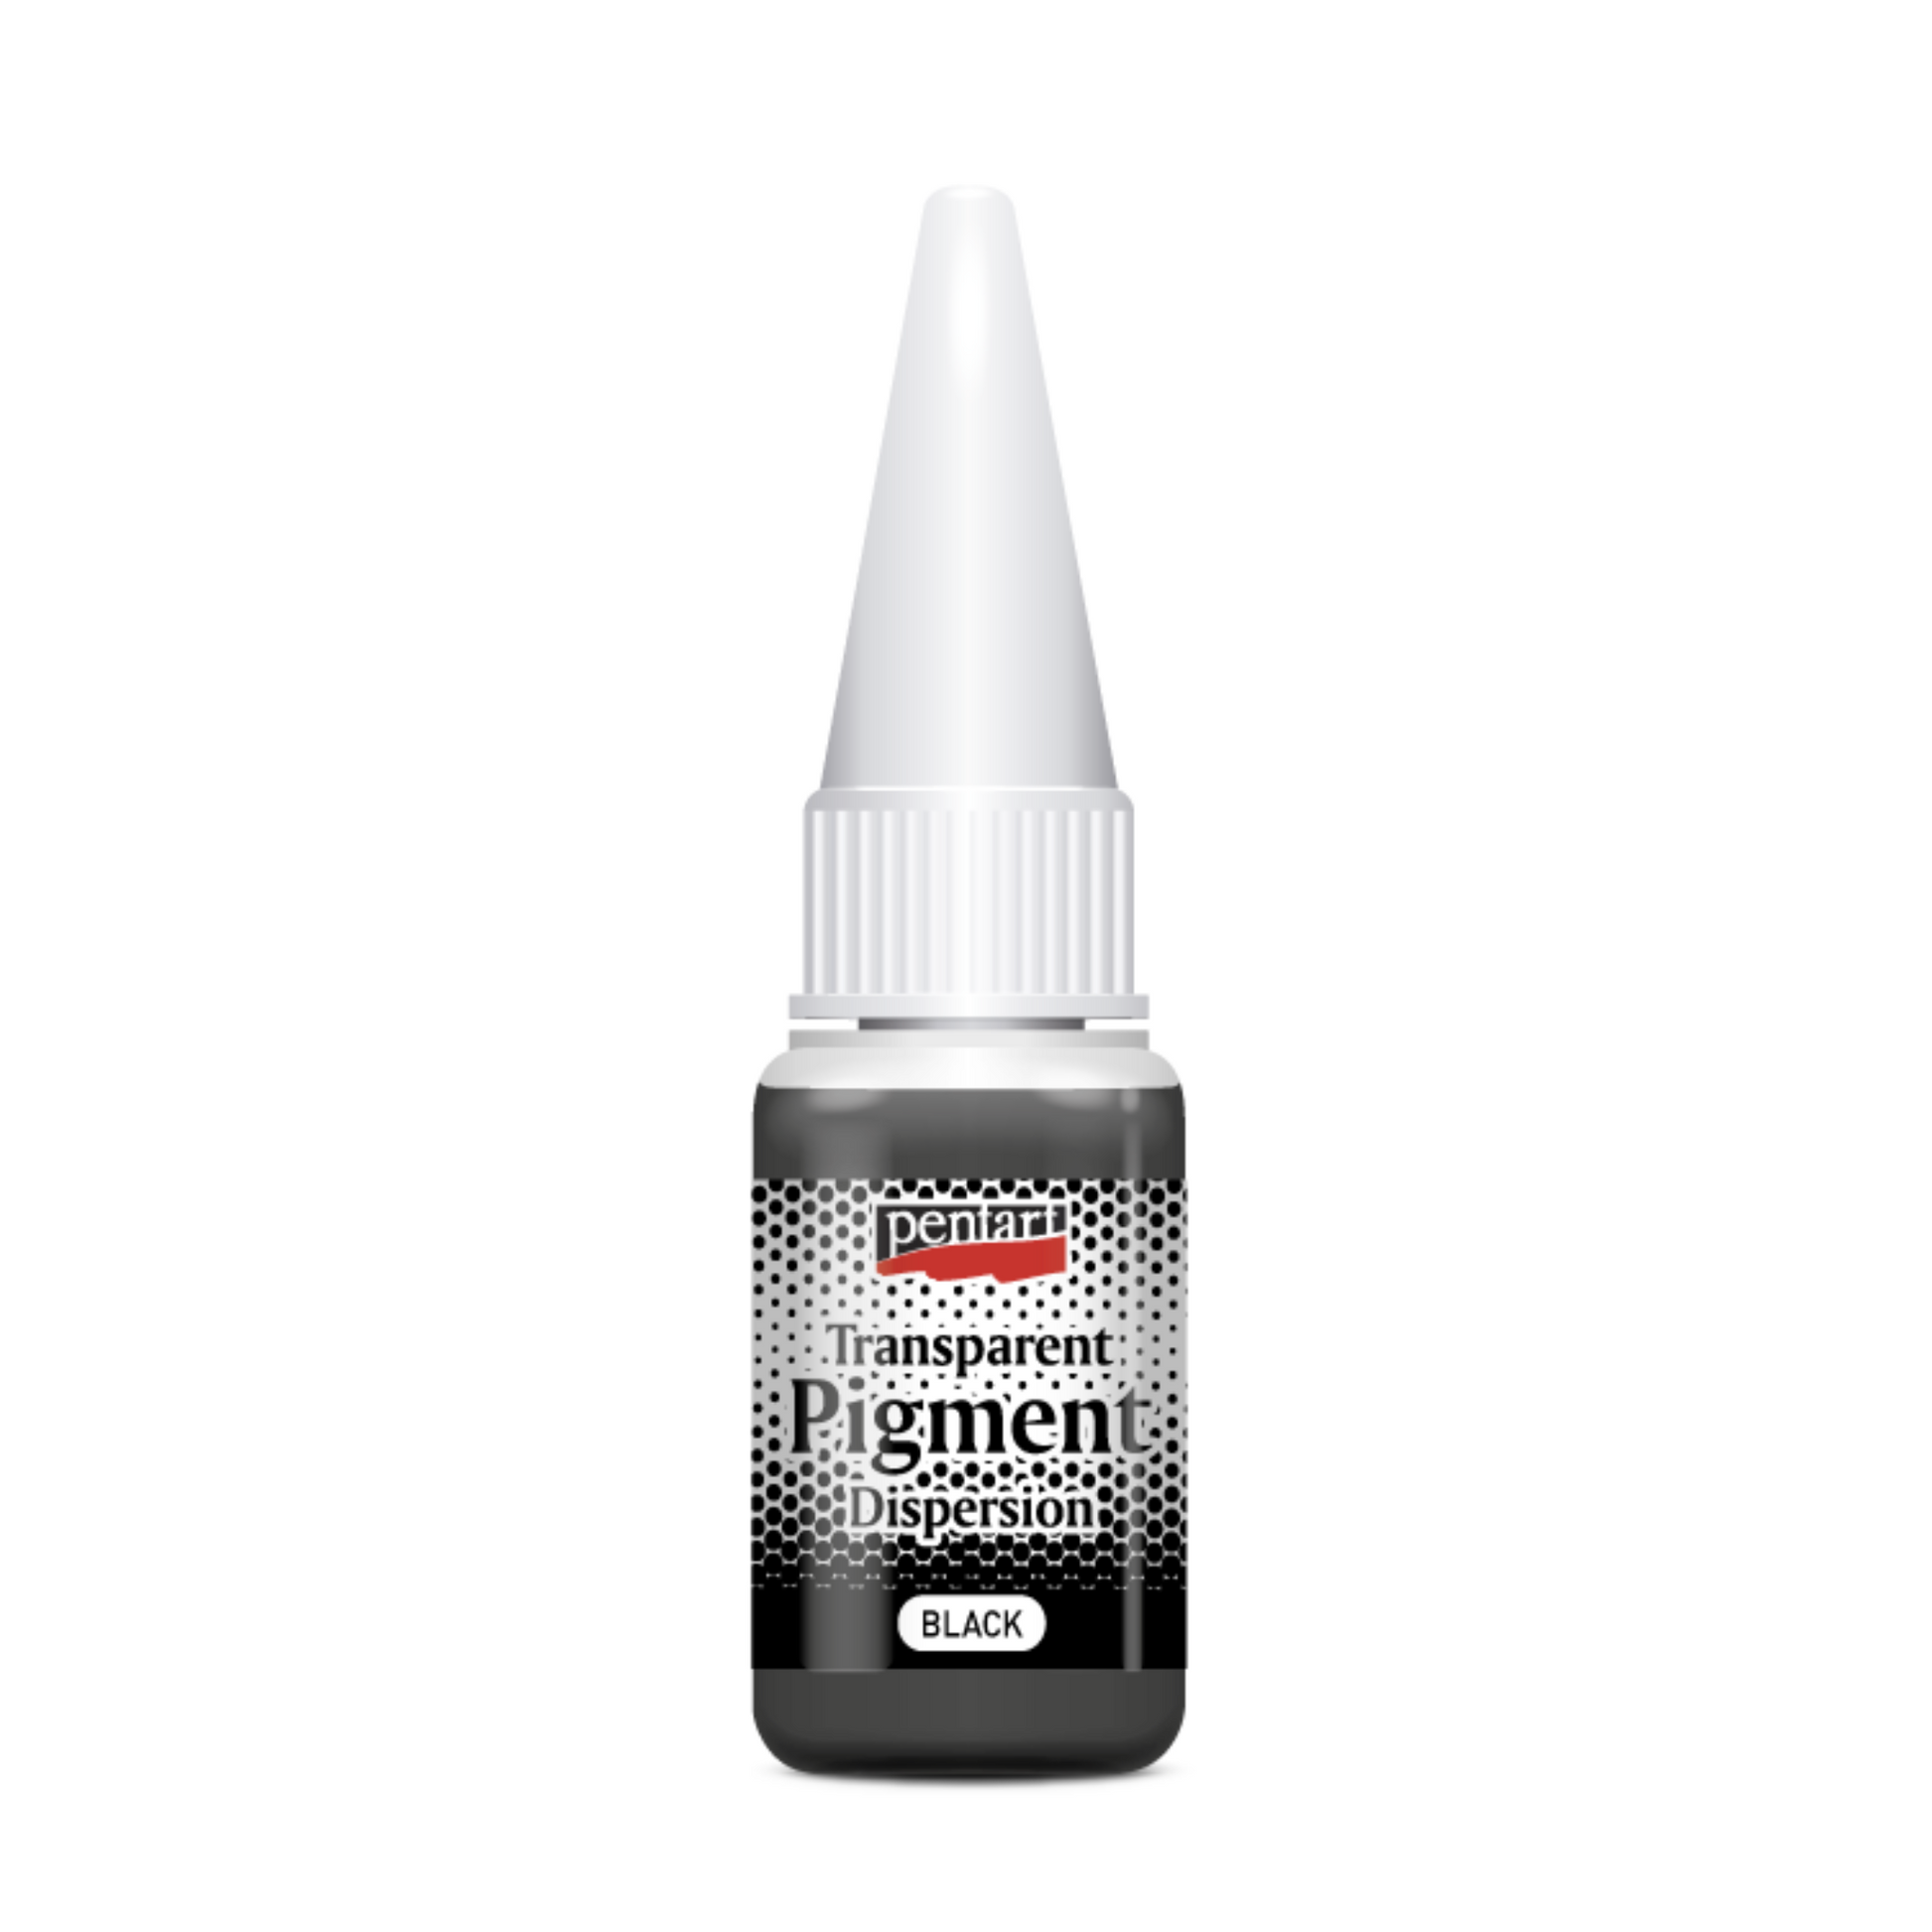 Transparent Pigment Dispersion - Black - By Pentart available at Milton's Daughter.